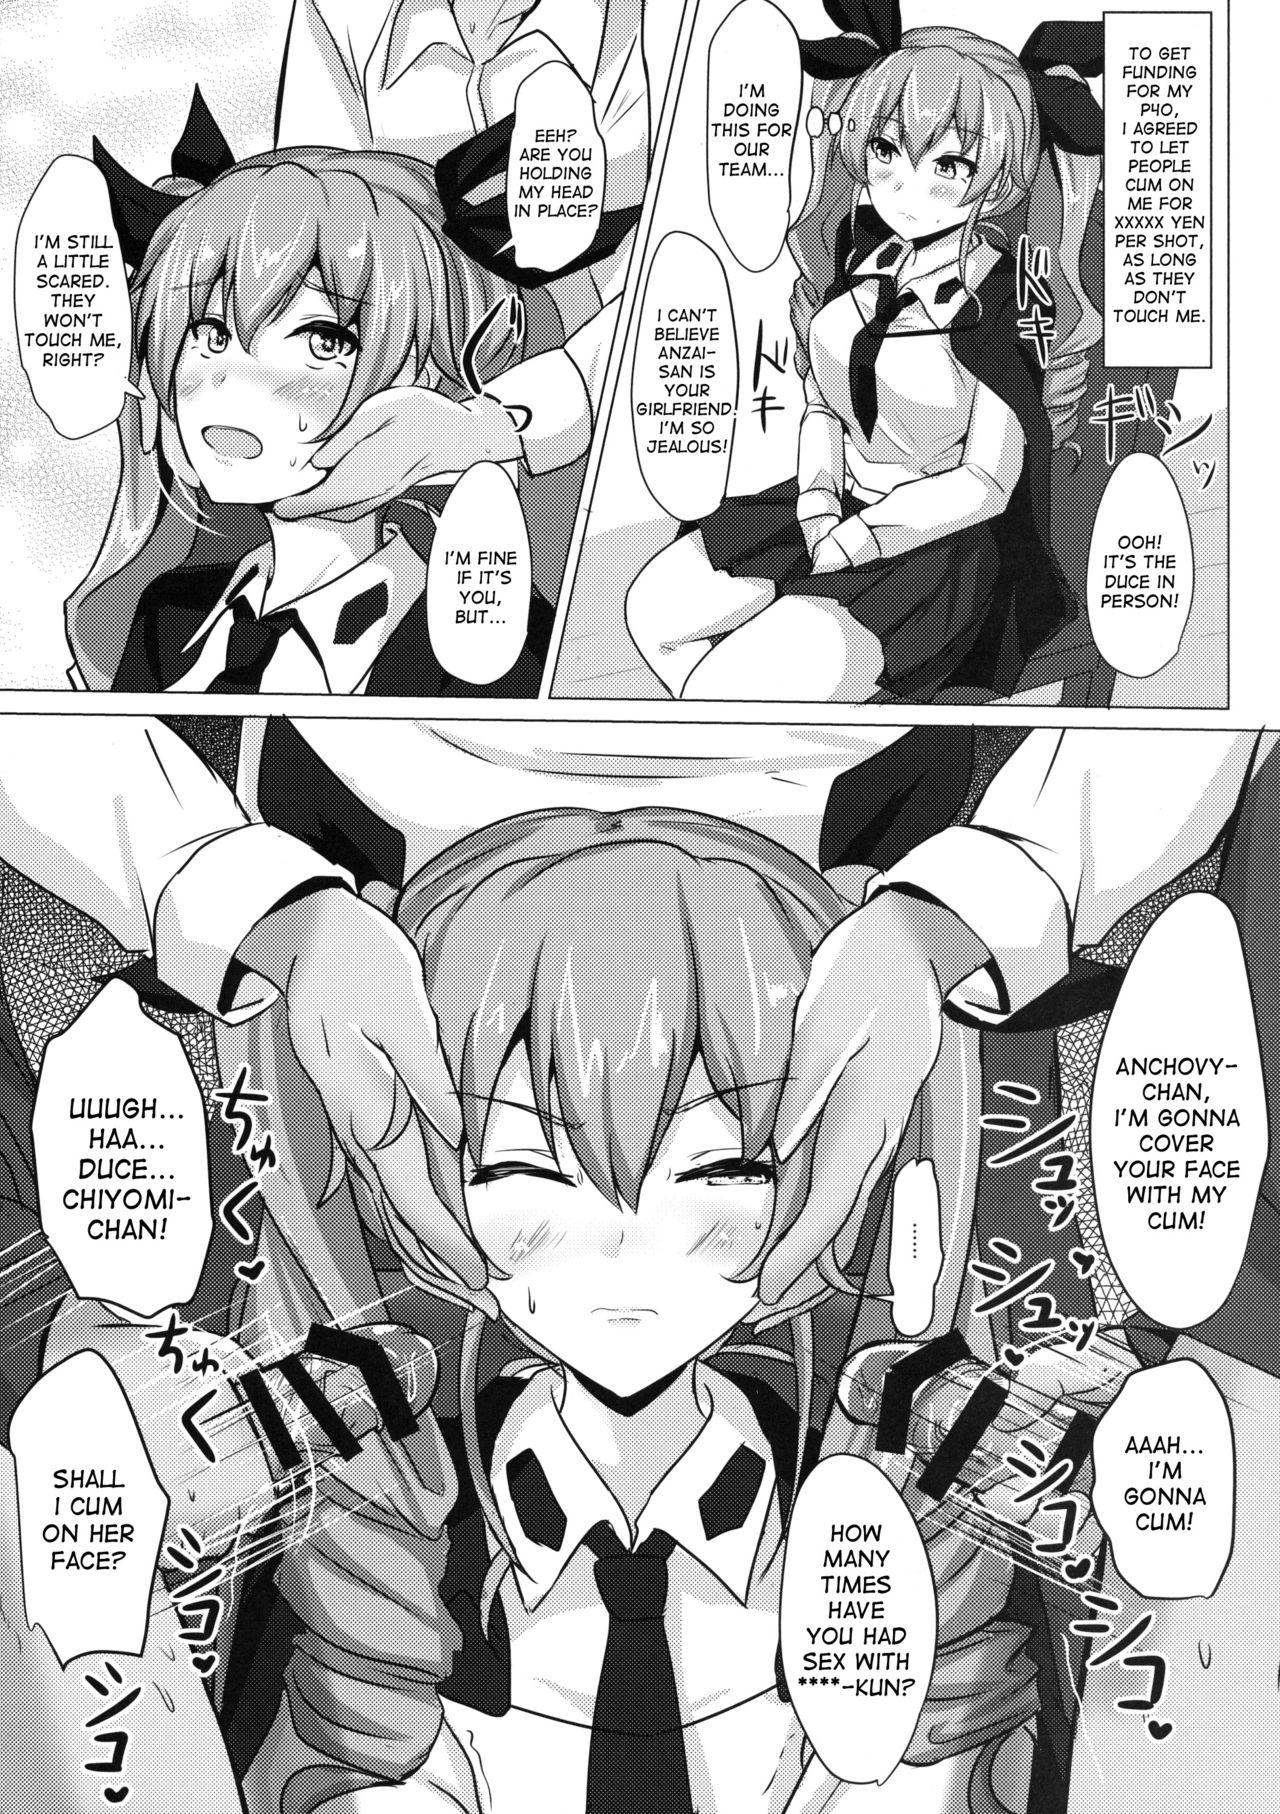 Natural Tits Anchovy Nee-san White Sauce Zoe - Girls und panzer Facial Cumshot - Page 7